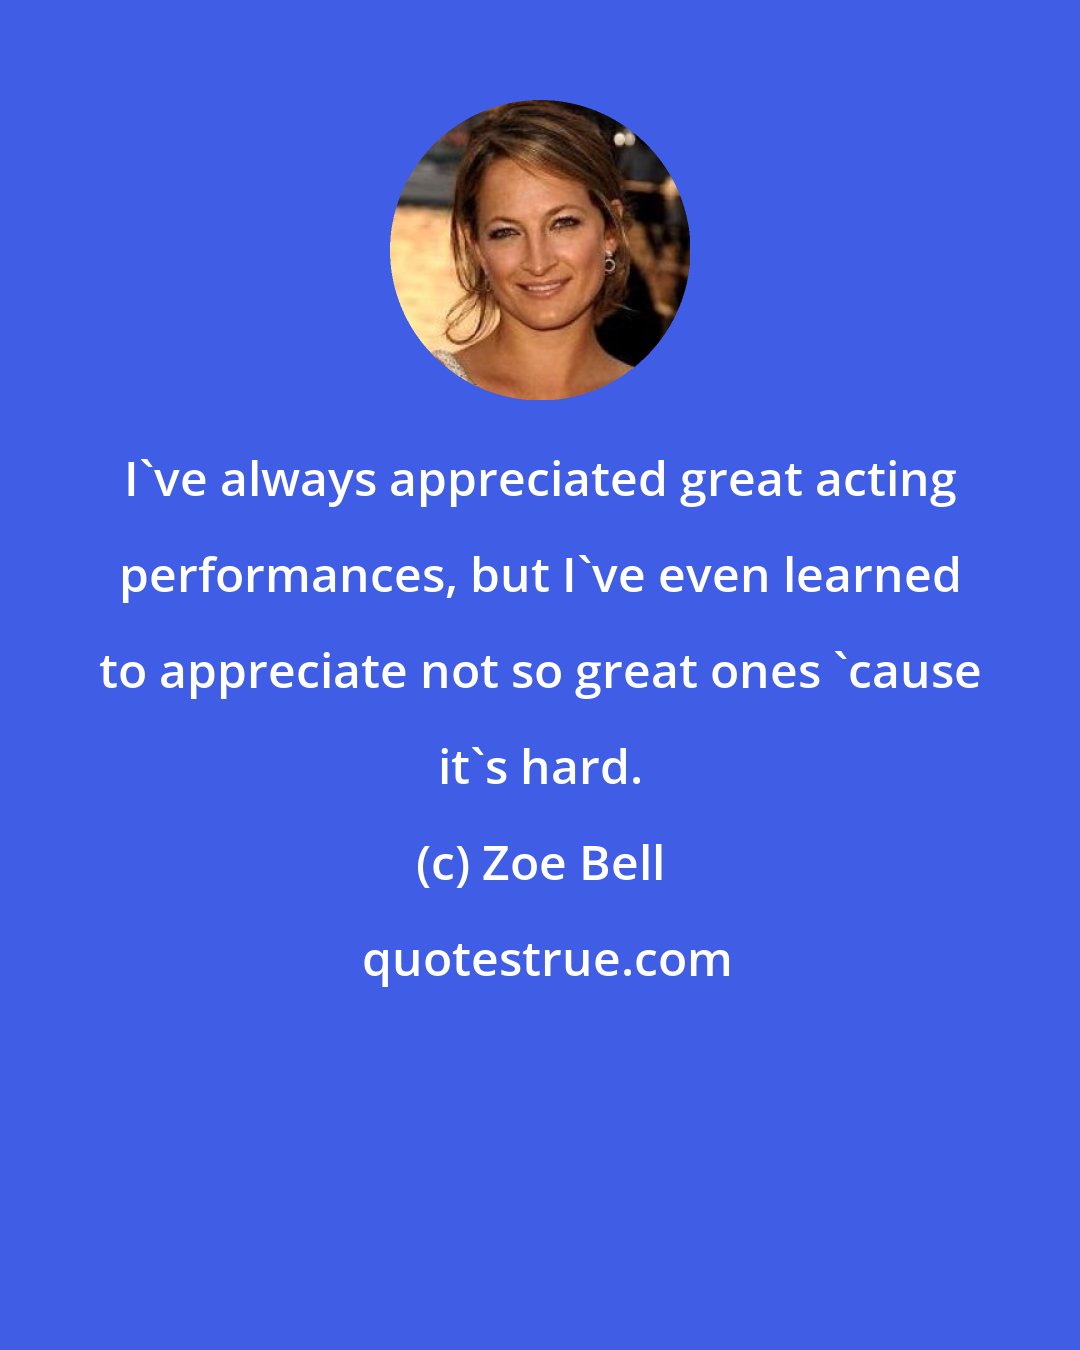 Zoe Bell: I've always appreciated great acting performances, but I've even learned to appreciate not so great ones 'cause it's hard.